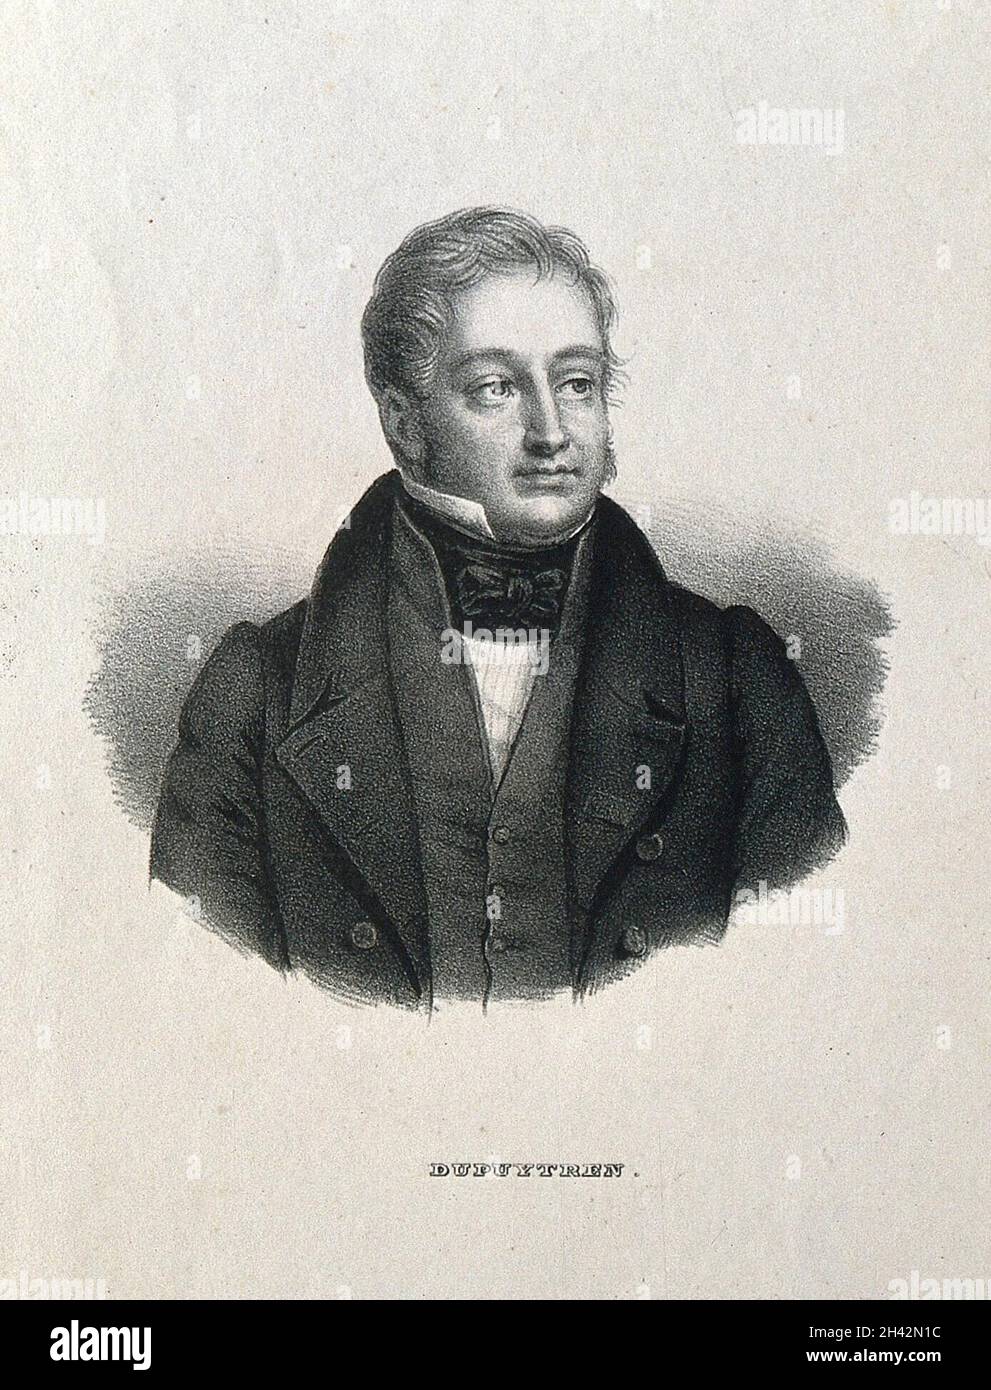 Guillaume, Baron Dupuytren. Lithographie. Stockfoto